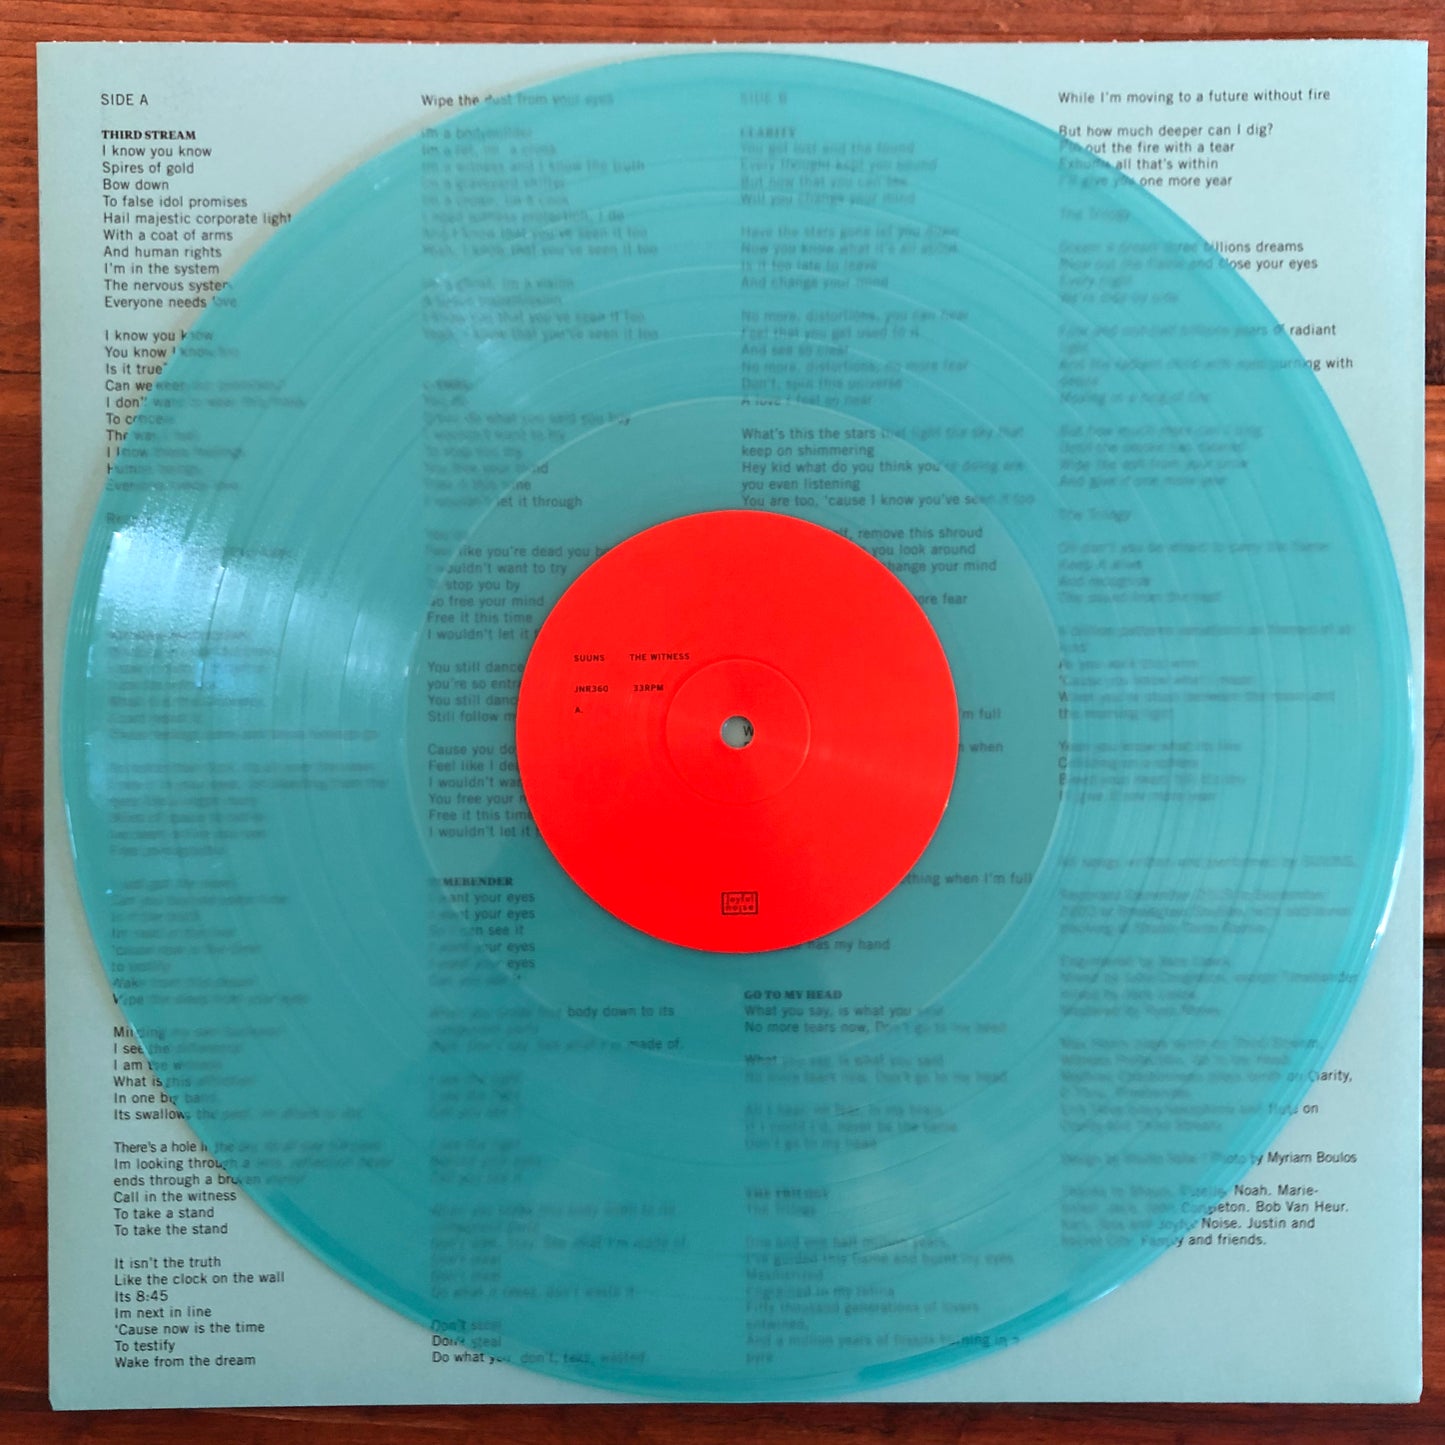 Suuns, “The Witness” (Bright Blue Vinyl) [Used]